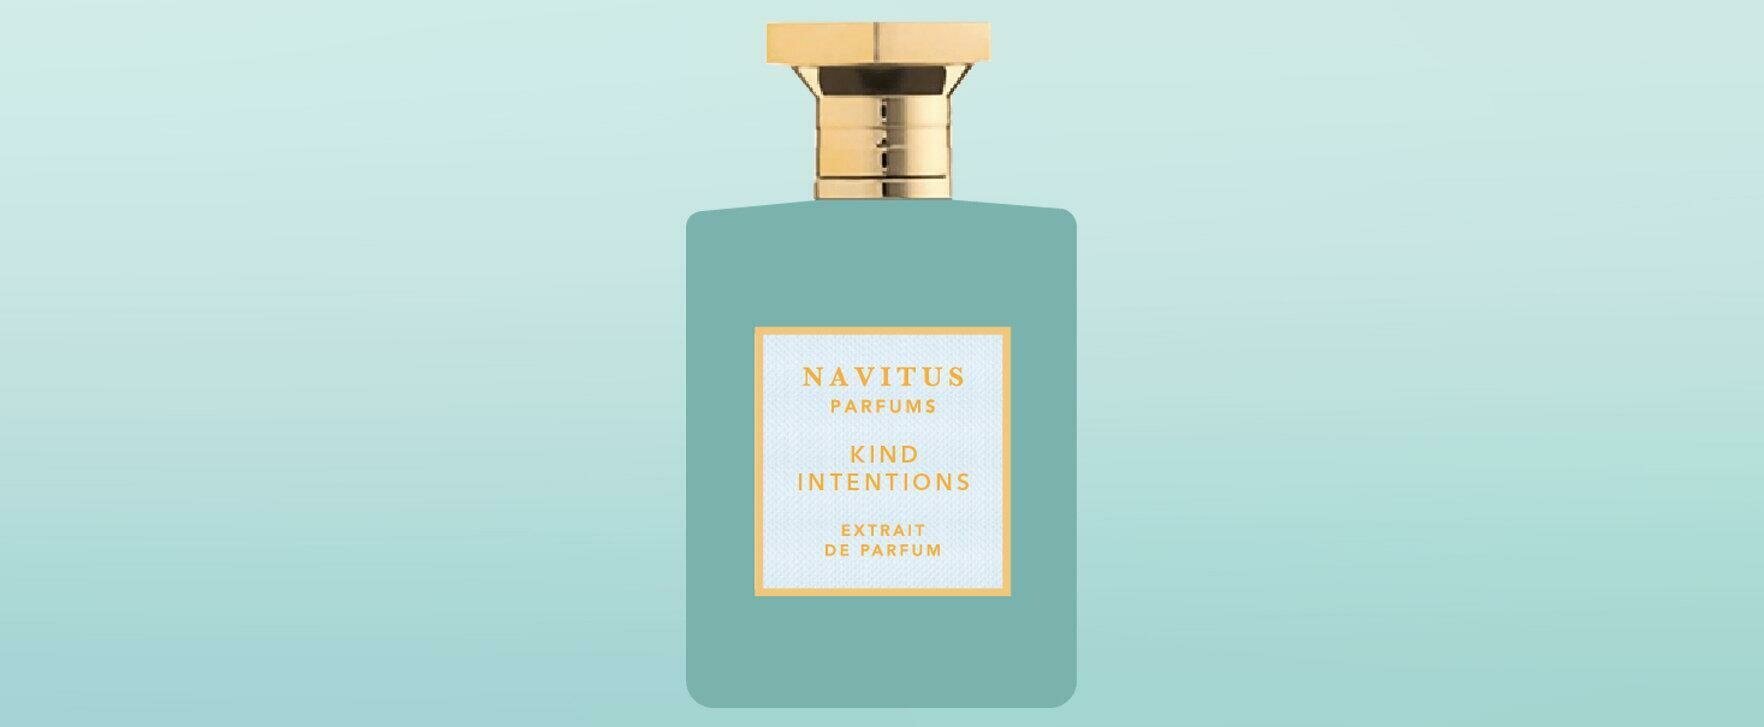 "Kind Intentions": The New Fruity Unisex Fragrance From Navitus Parfums